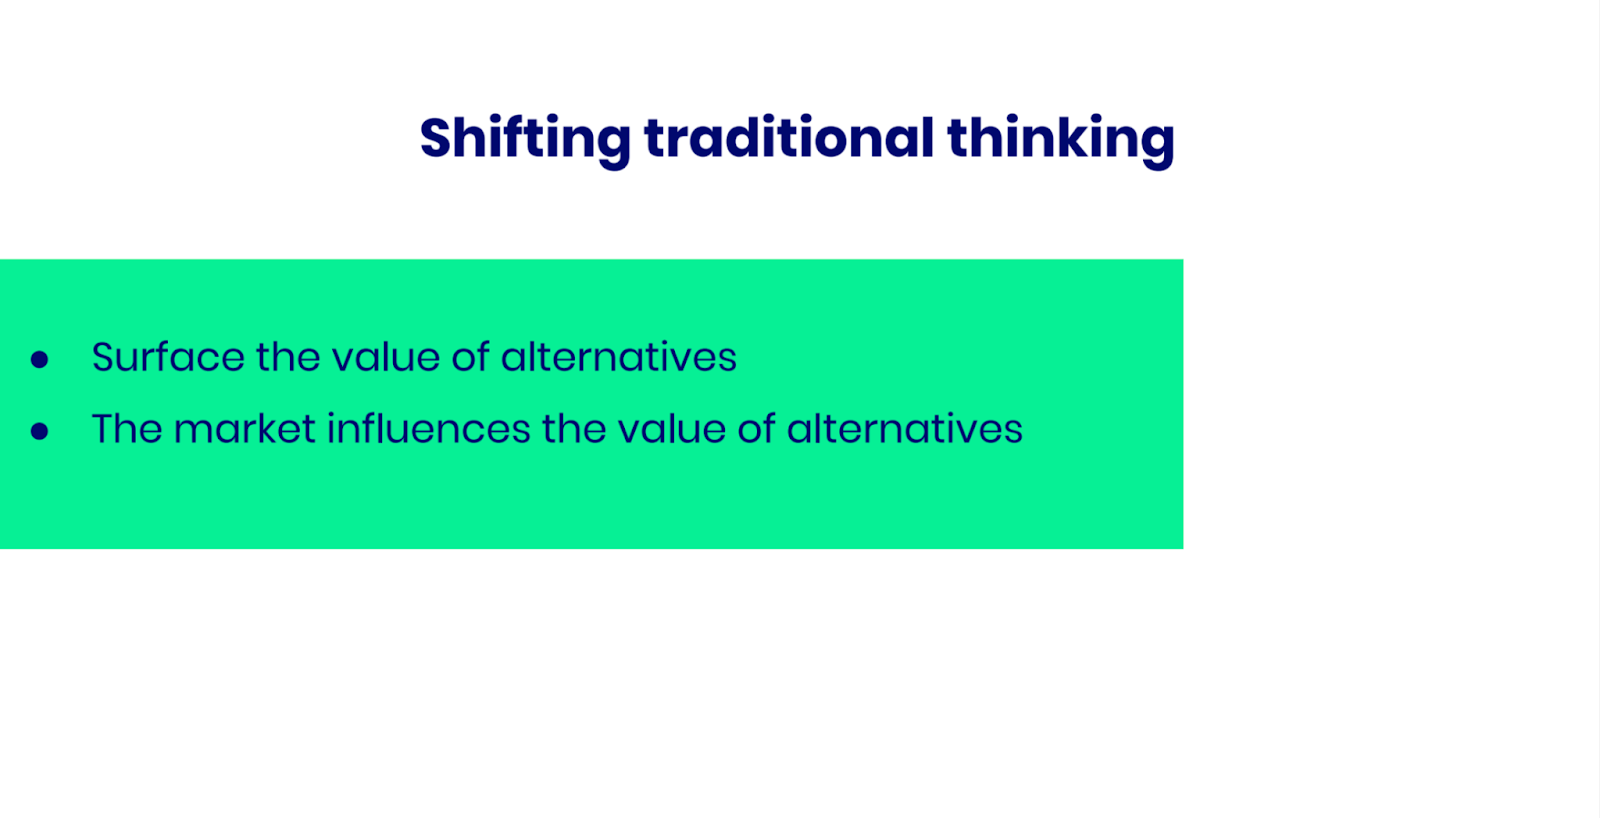 Shifting traditional thinking involves surfacing the value of alternatives and focusing on the way the market influences the value of alternatives.